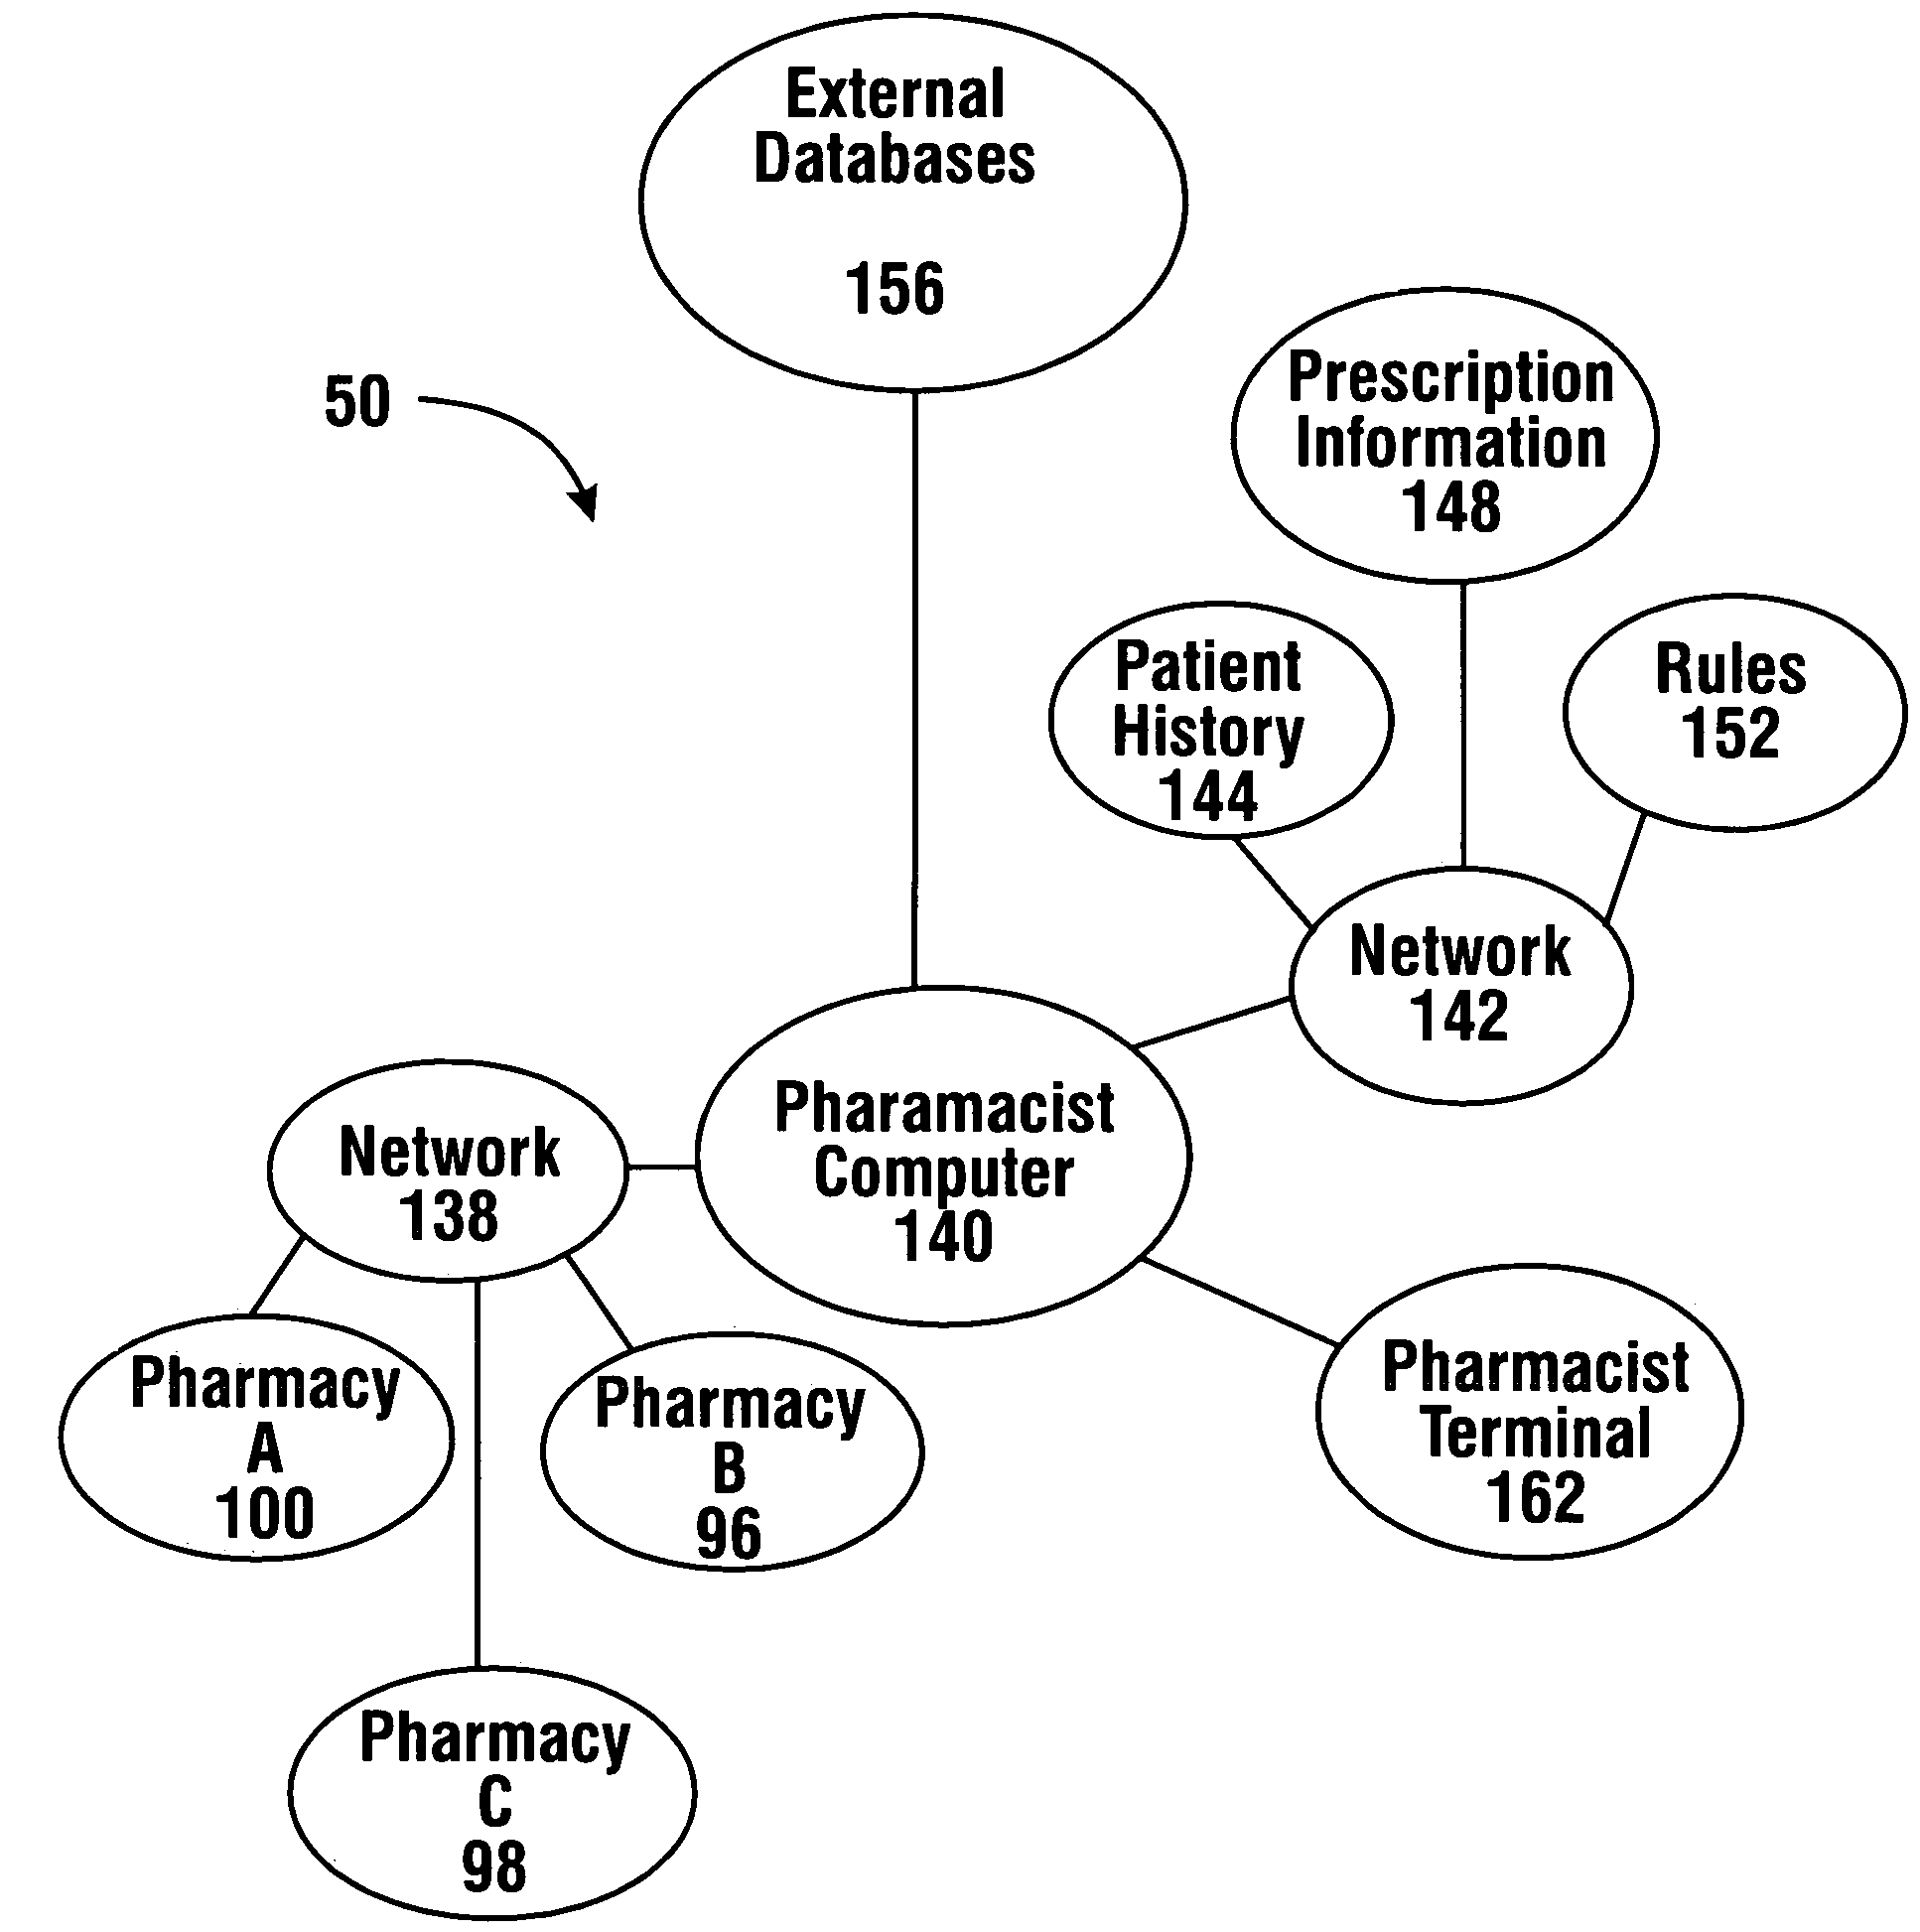 Pharmaceutical system in which pharmaceutical care is provided by a remote professional serving multiple pharmacies